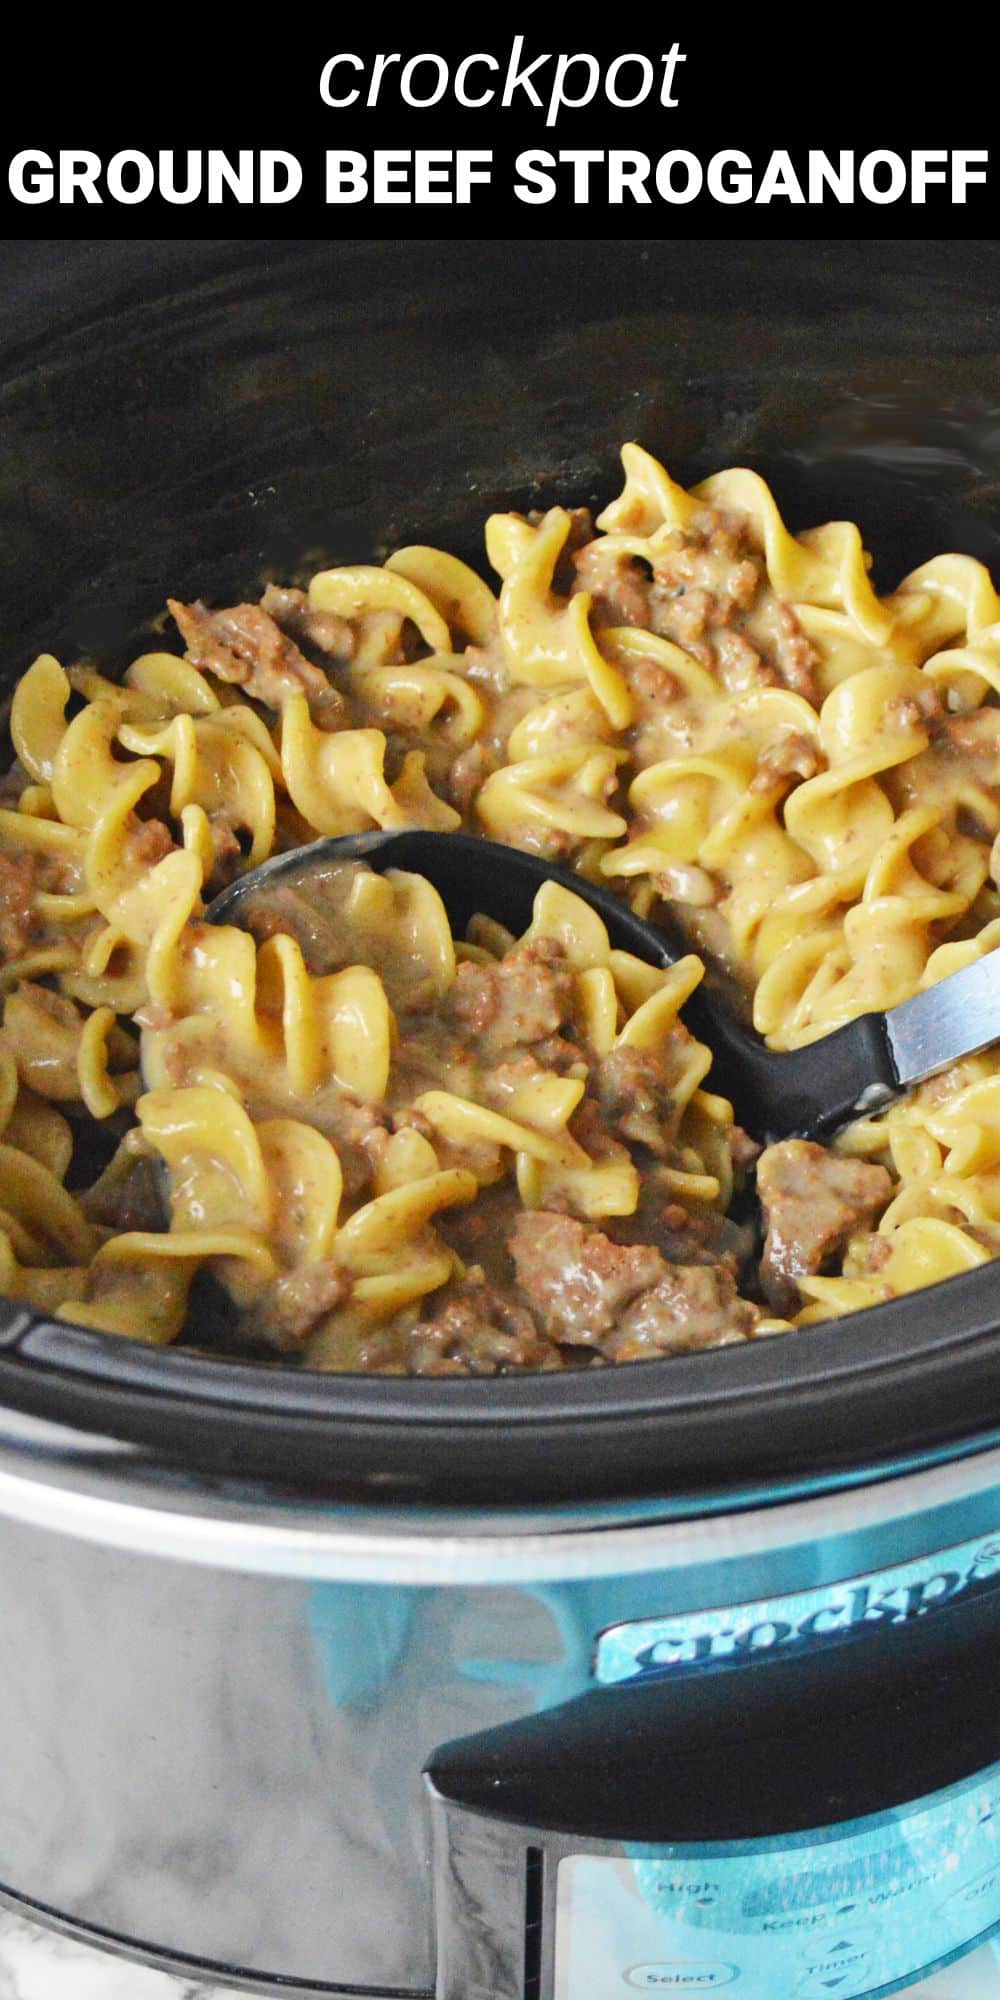 This easy to make Crockpot Ground Beef Stroganoff recipe is a delicious, cozy, comfort food filled with savory beef slow cooked in a decadent creamy sauce served over tender noodles. It’s a flavorful and hearty meal that's guaranteed to be a family favorite.